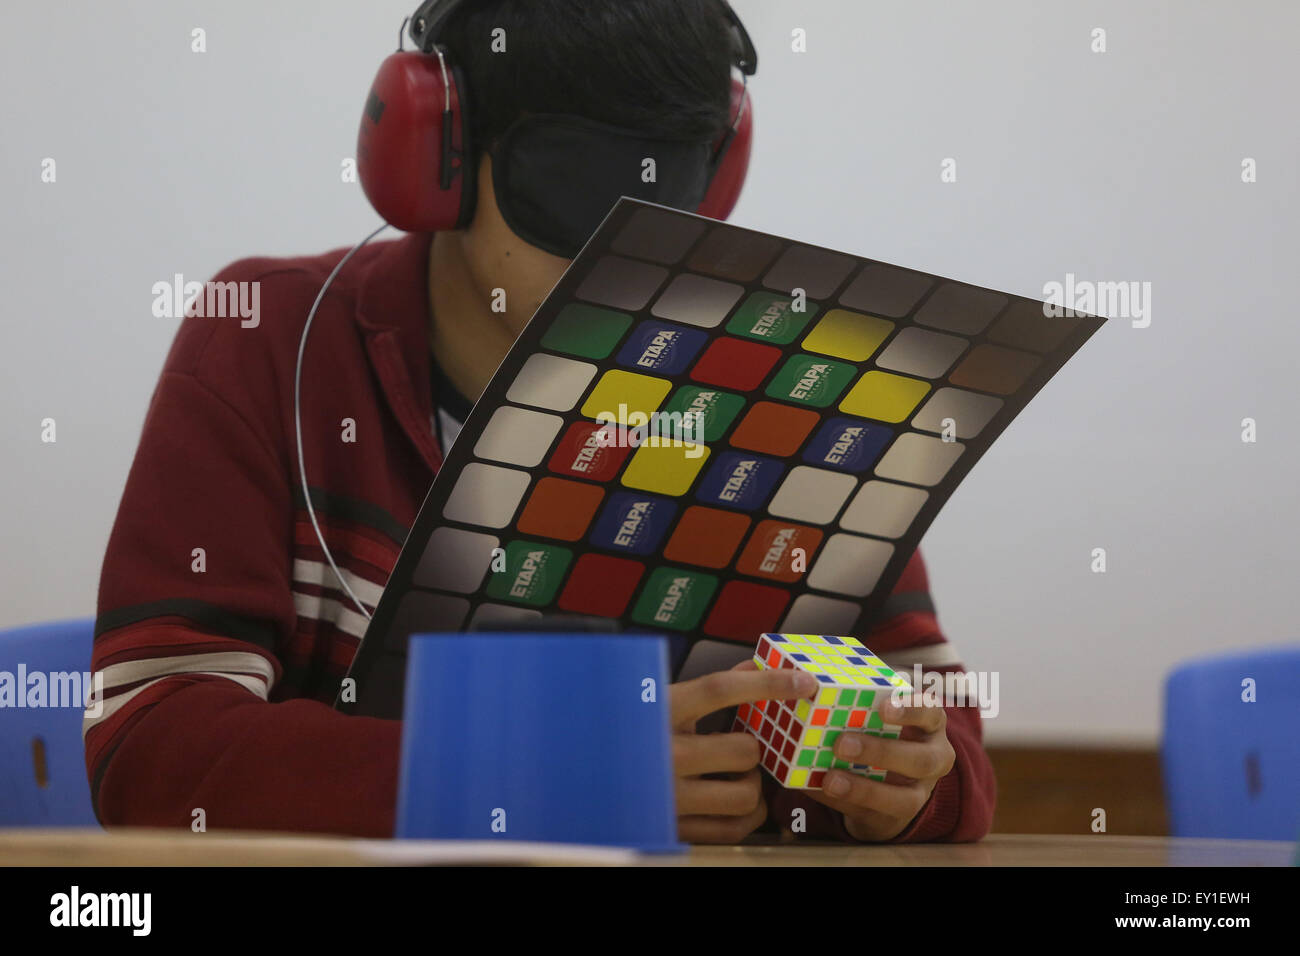 Sao Paulo. 19th July, 2015. A blindfolded competitor tries to solve Rubik's cubes during the 8th Rubik's Cube World Championship in Sao Paulo, Brazil on July 19, 2015. According to local press, around 400 competitors from 40 countries took part in the 2015 event. © Rahel Patrasso/Xinhua/Alamy Live News Stock Photo